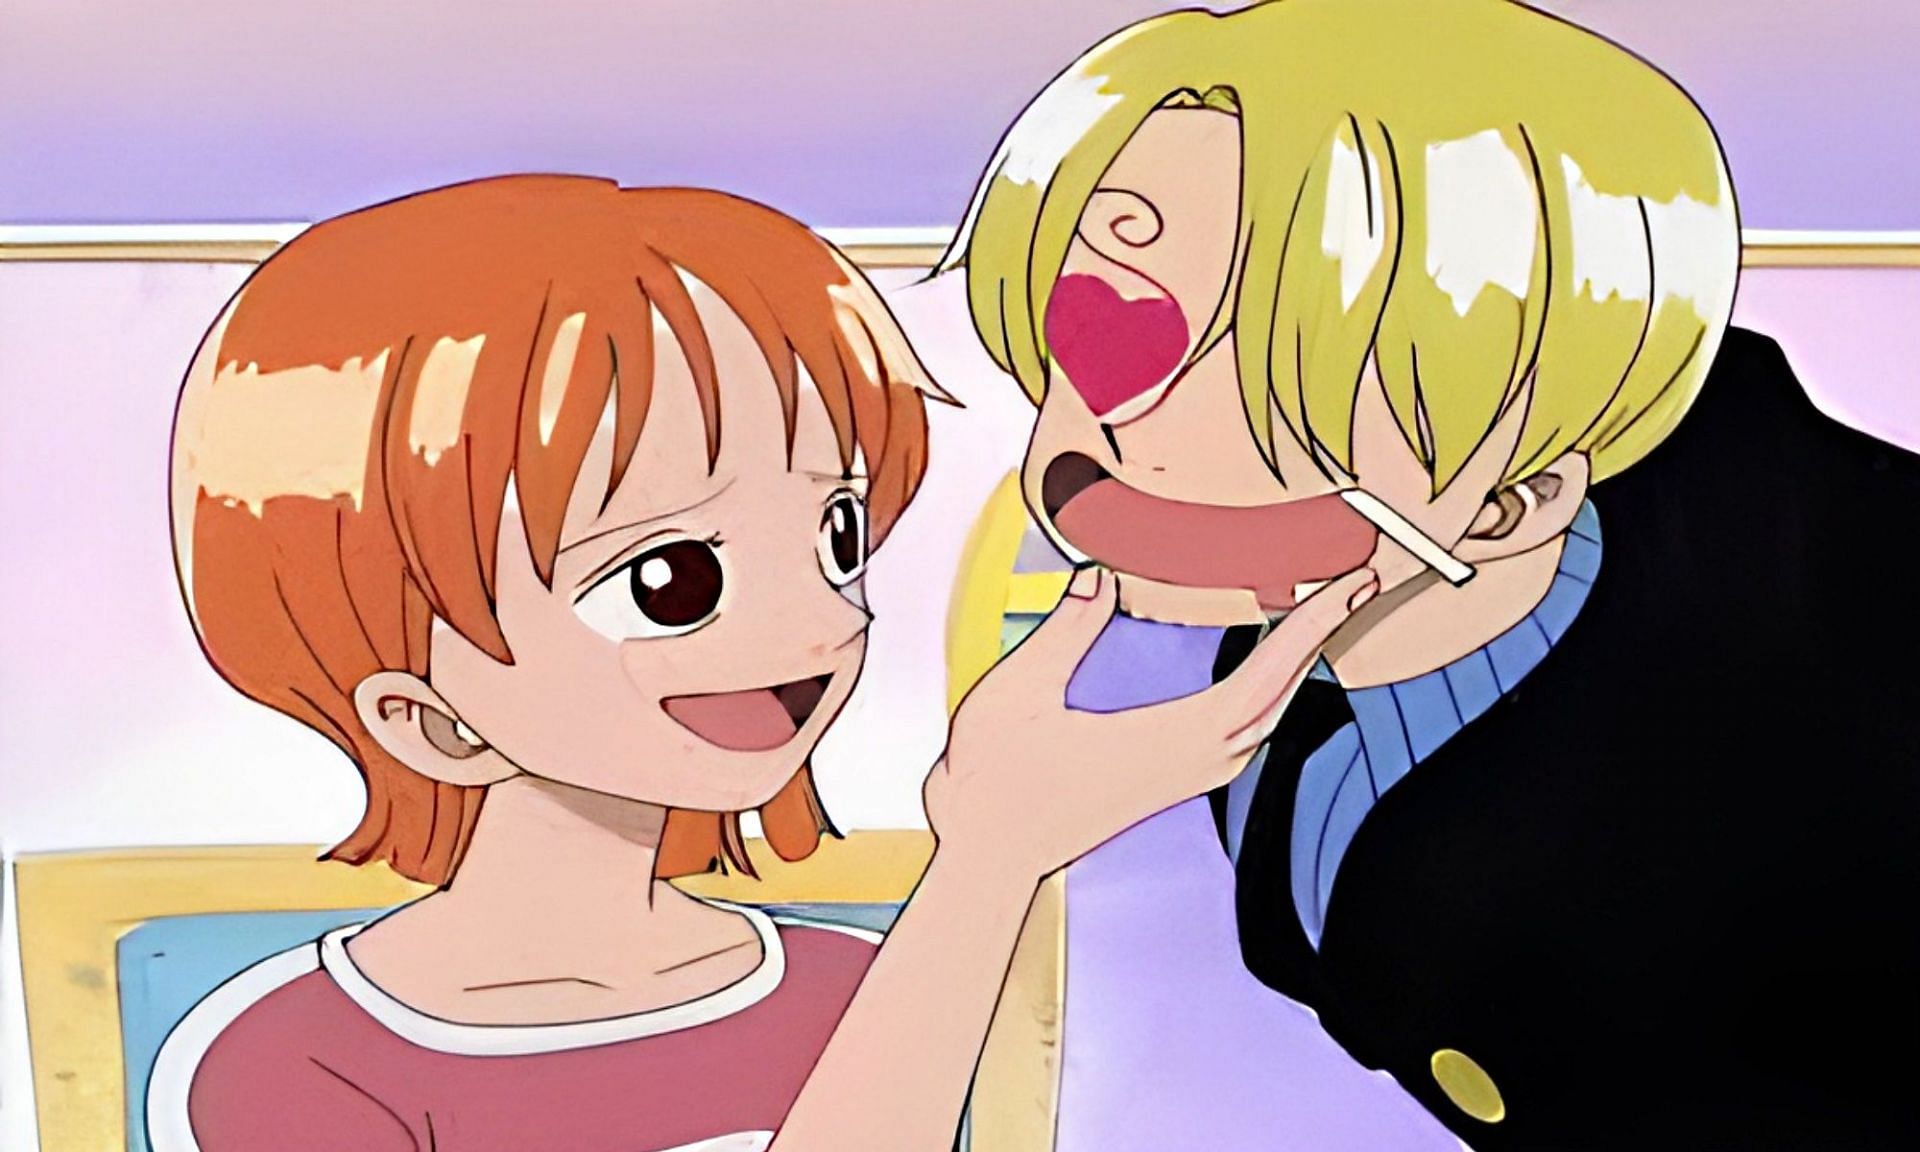 Nami is one of the more popular female characters in One Piece (Image via Toei Animation)